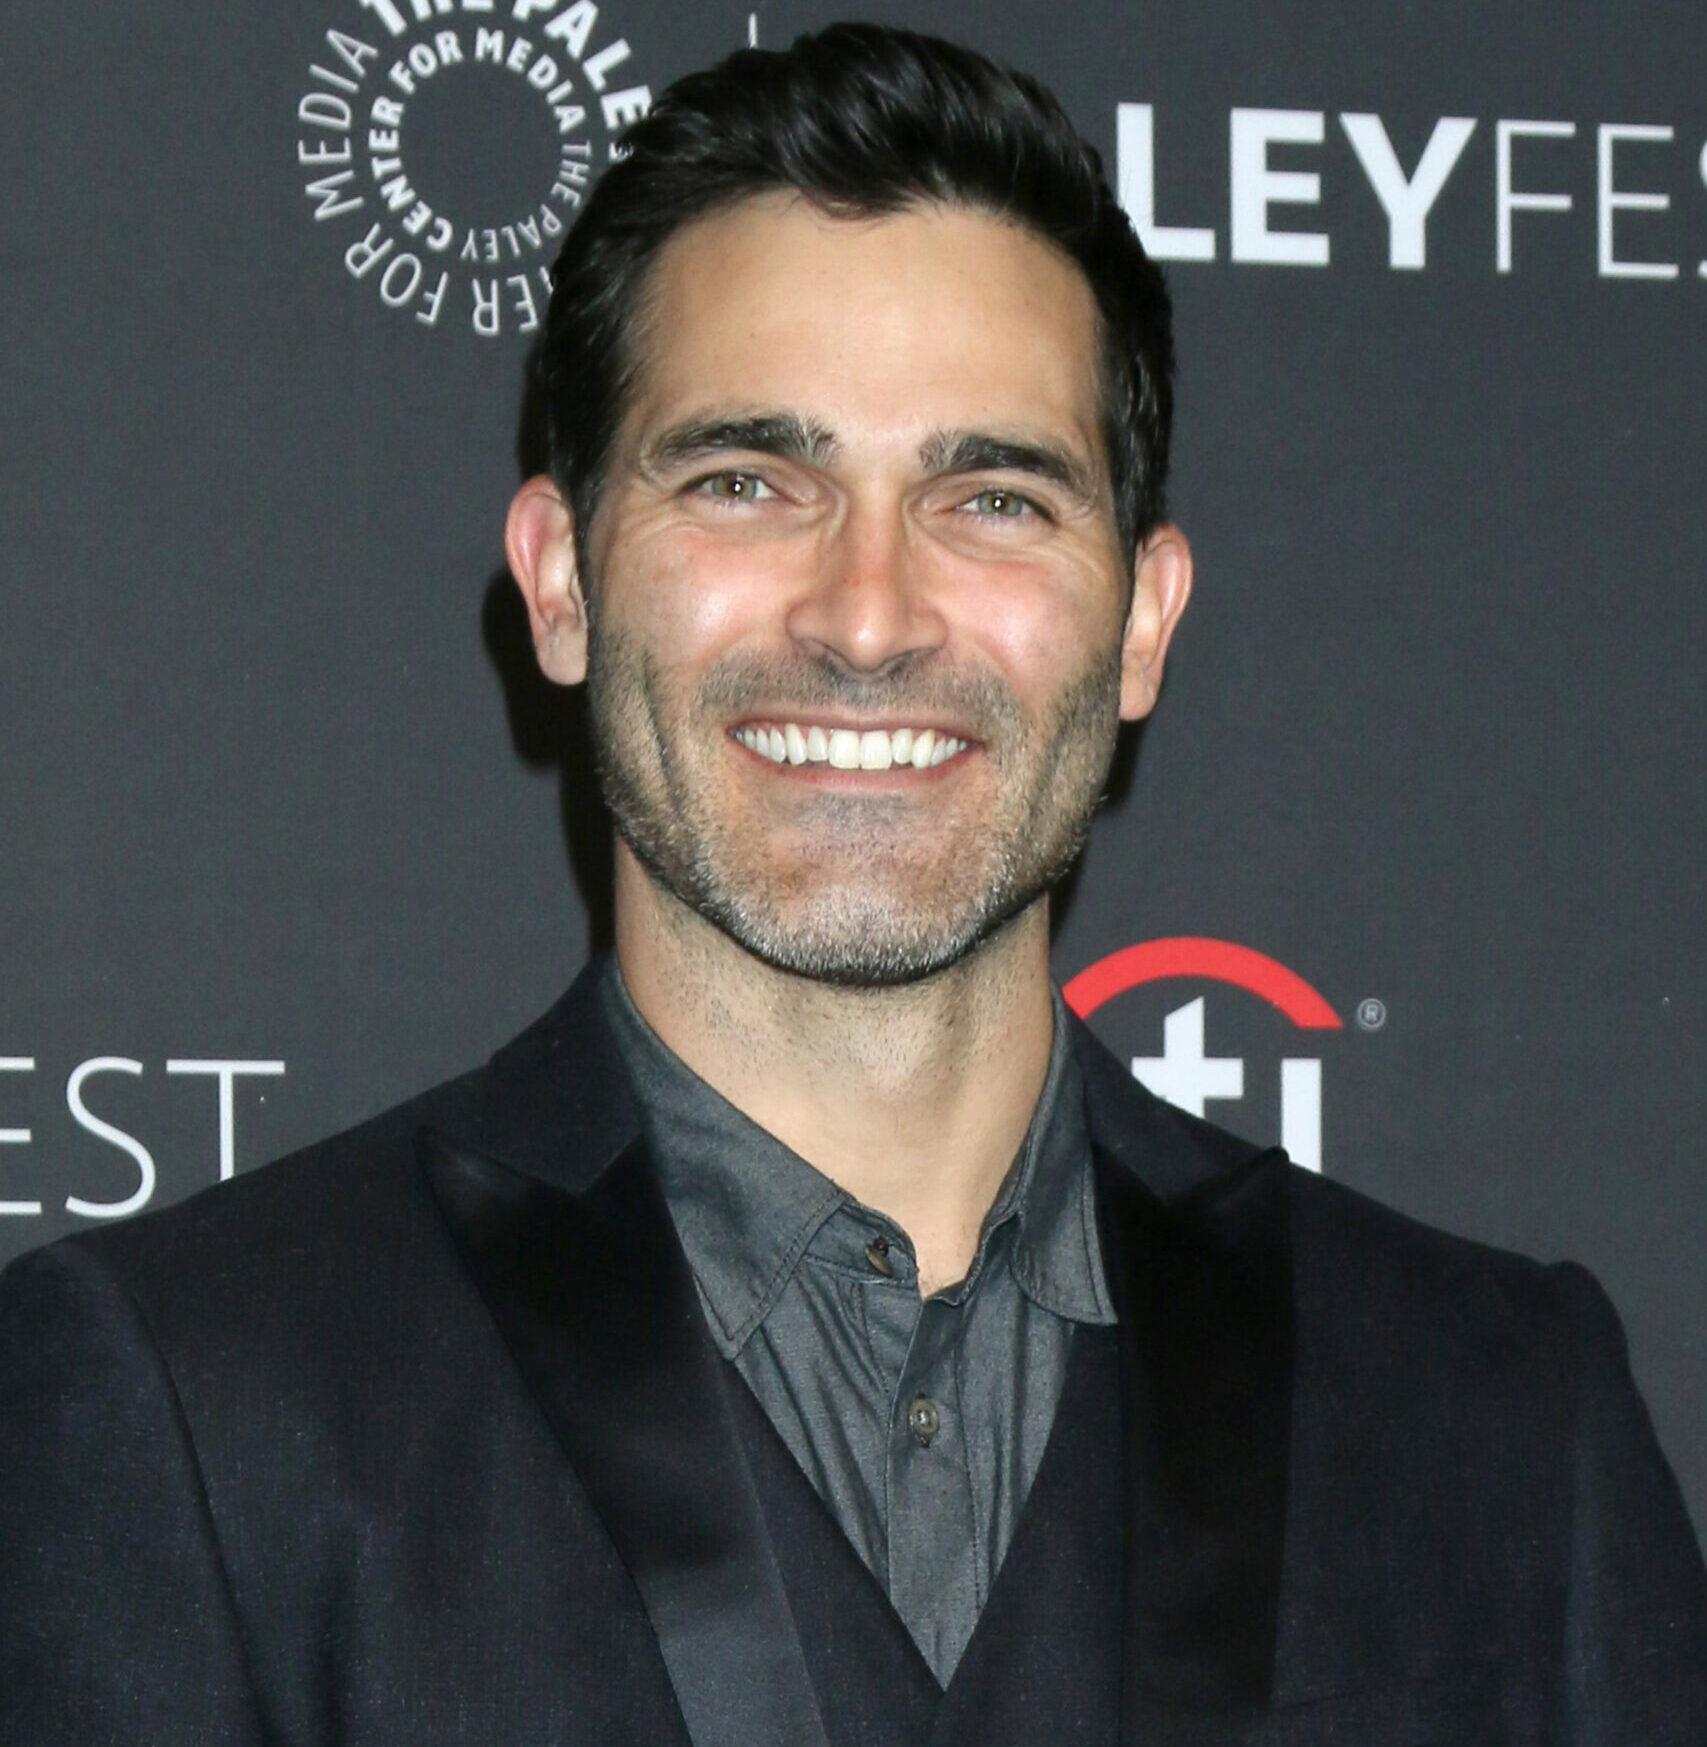 Tyler Hoechlin at the PaleyFEST 2022 - Superman and Lois at Dolby Theater on April 3, 2022 in Los Angeles, CA